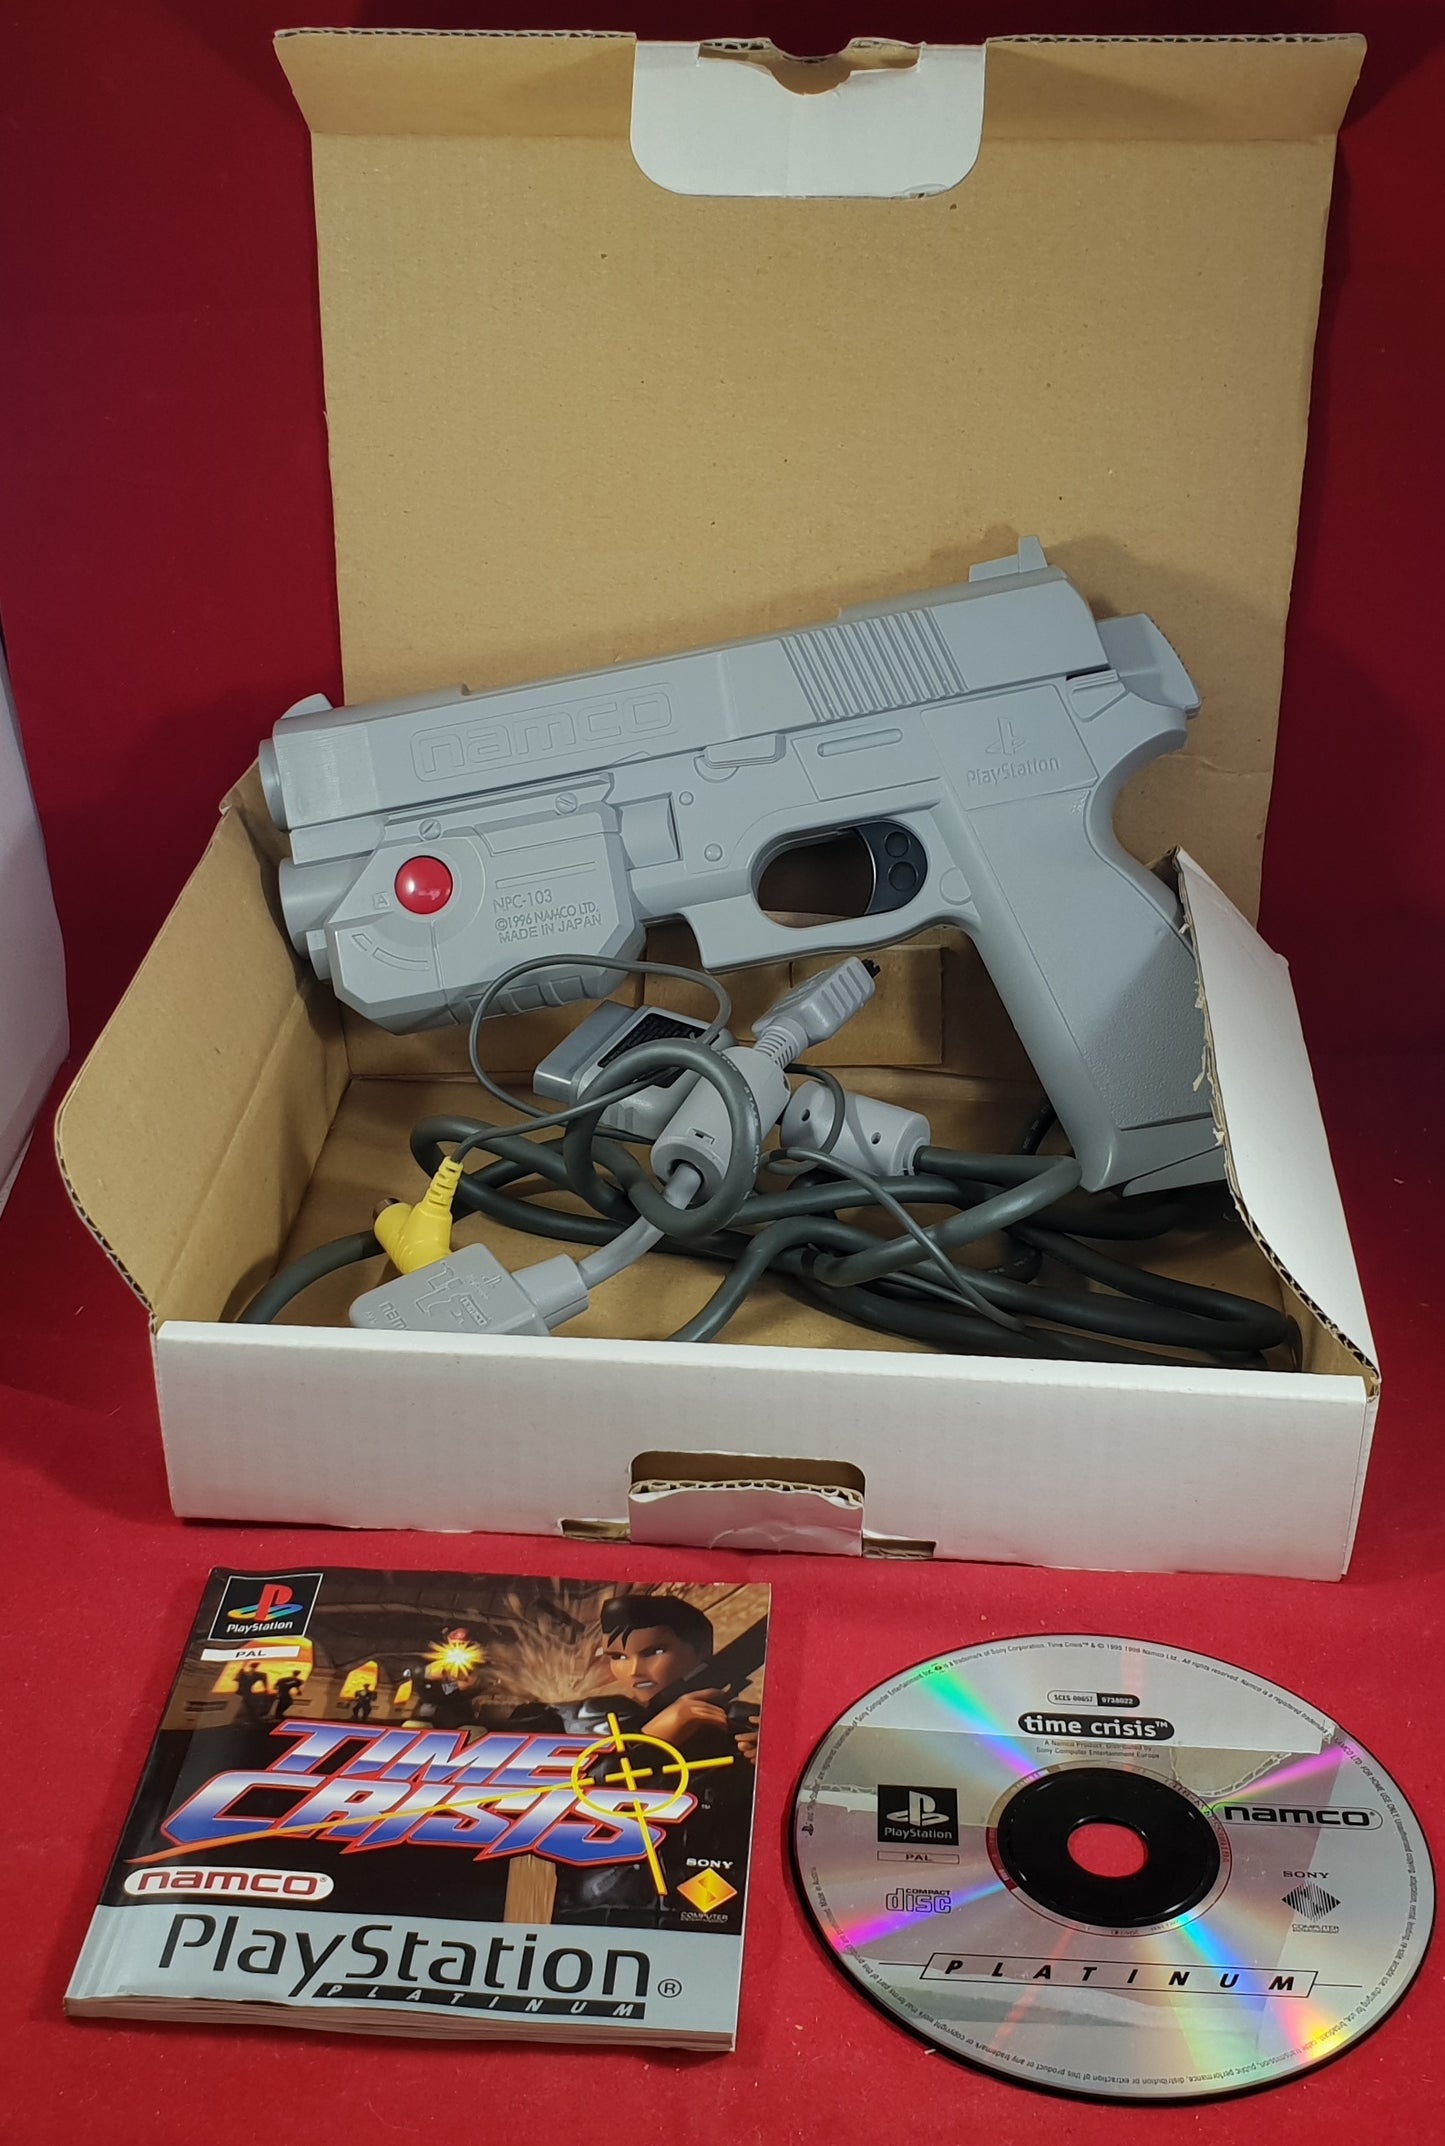 Namco G-Con 45 Light Gun Accessory with Time Crisis Game includes adaptor Sony Playstation 1 (PS1)